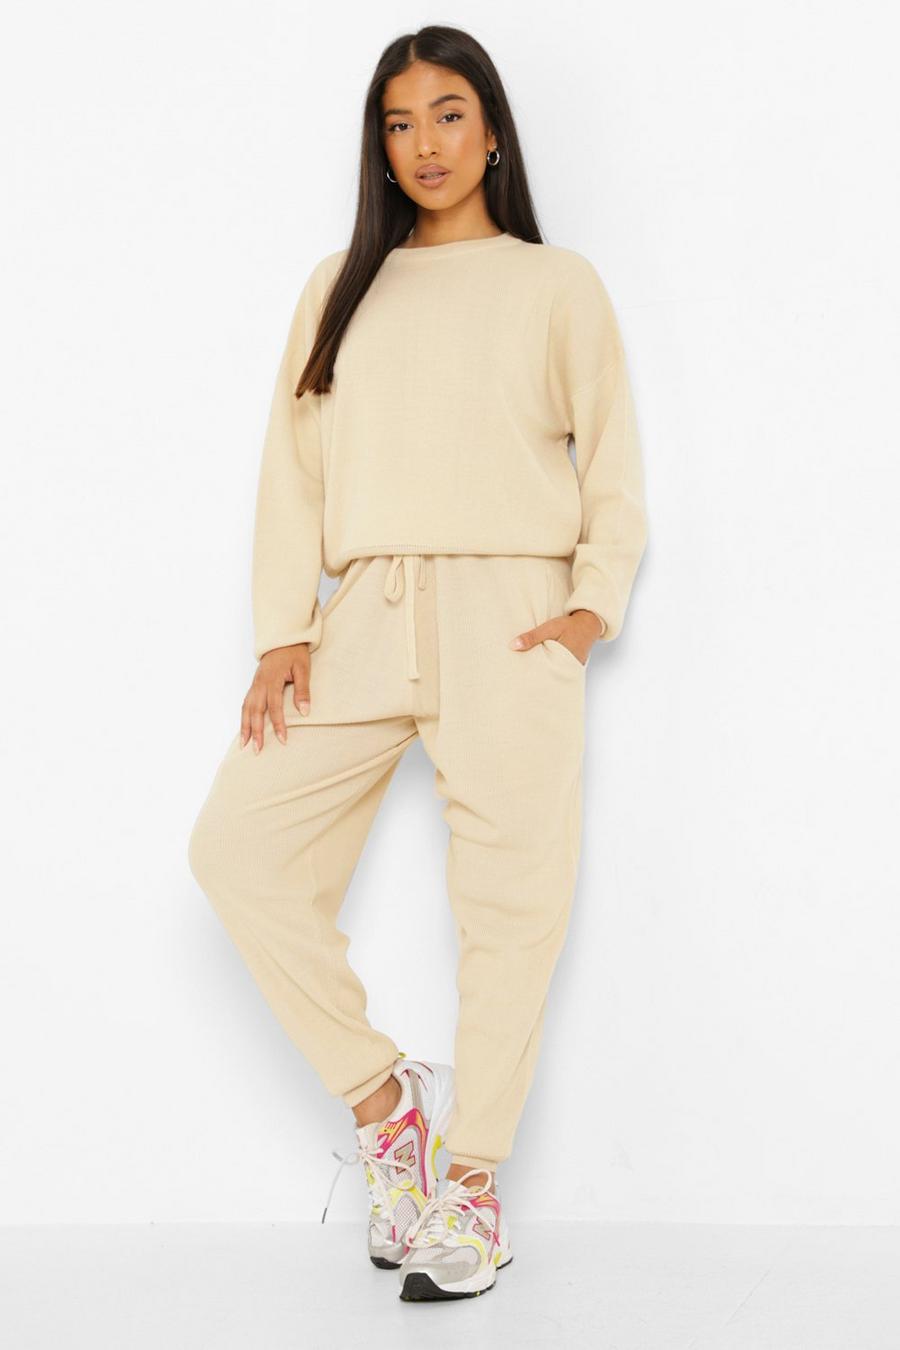 Women's Petite Knitted Jumper & Jogger Co-Oord | Boohoo UK